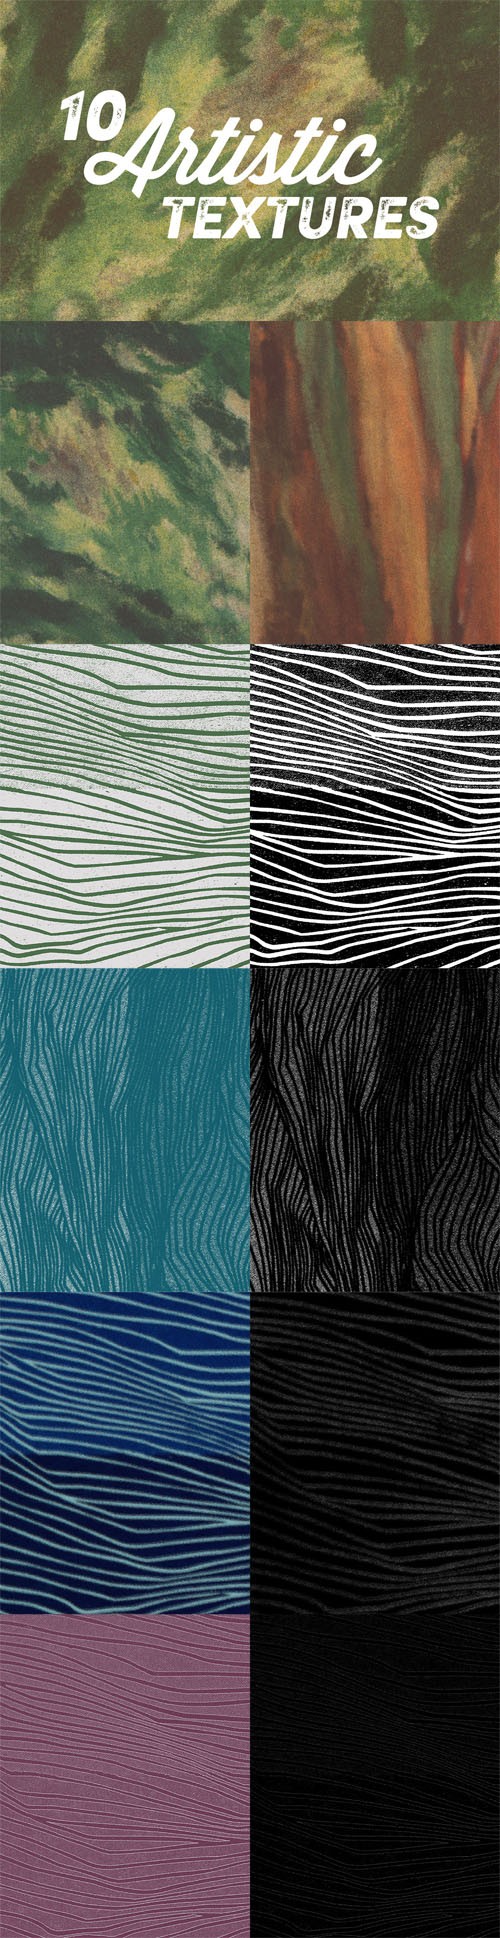 10 Handdrawn and Grunge Artistic Textures